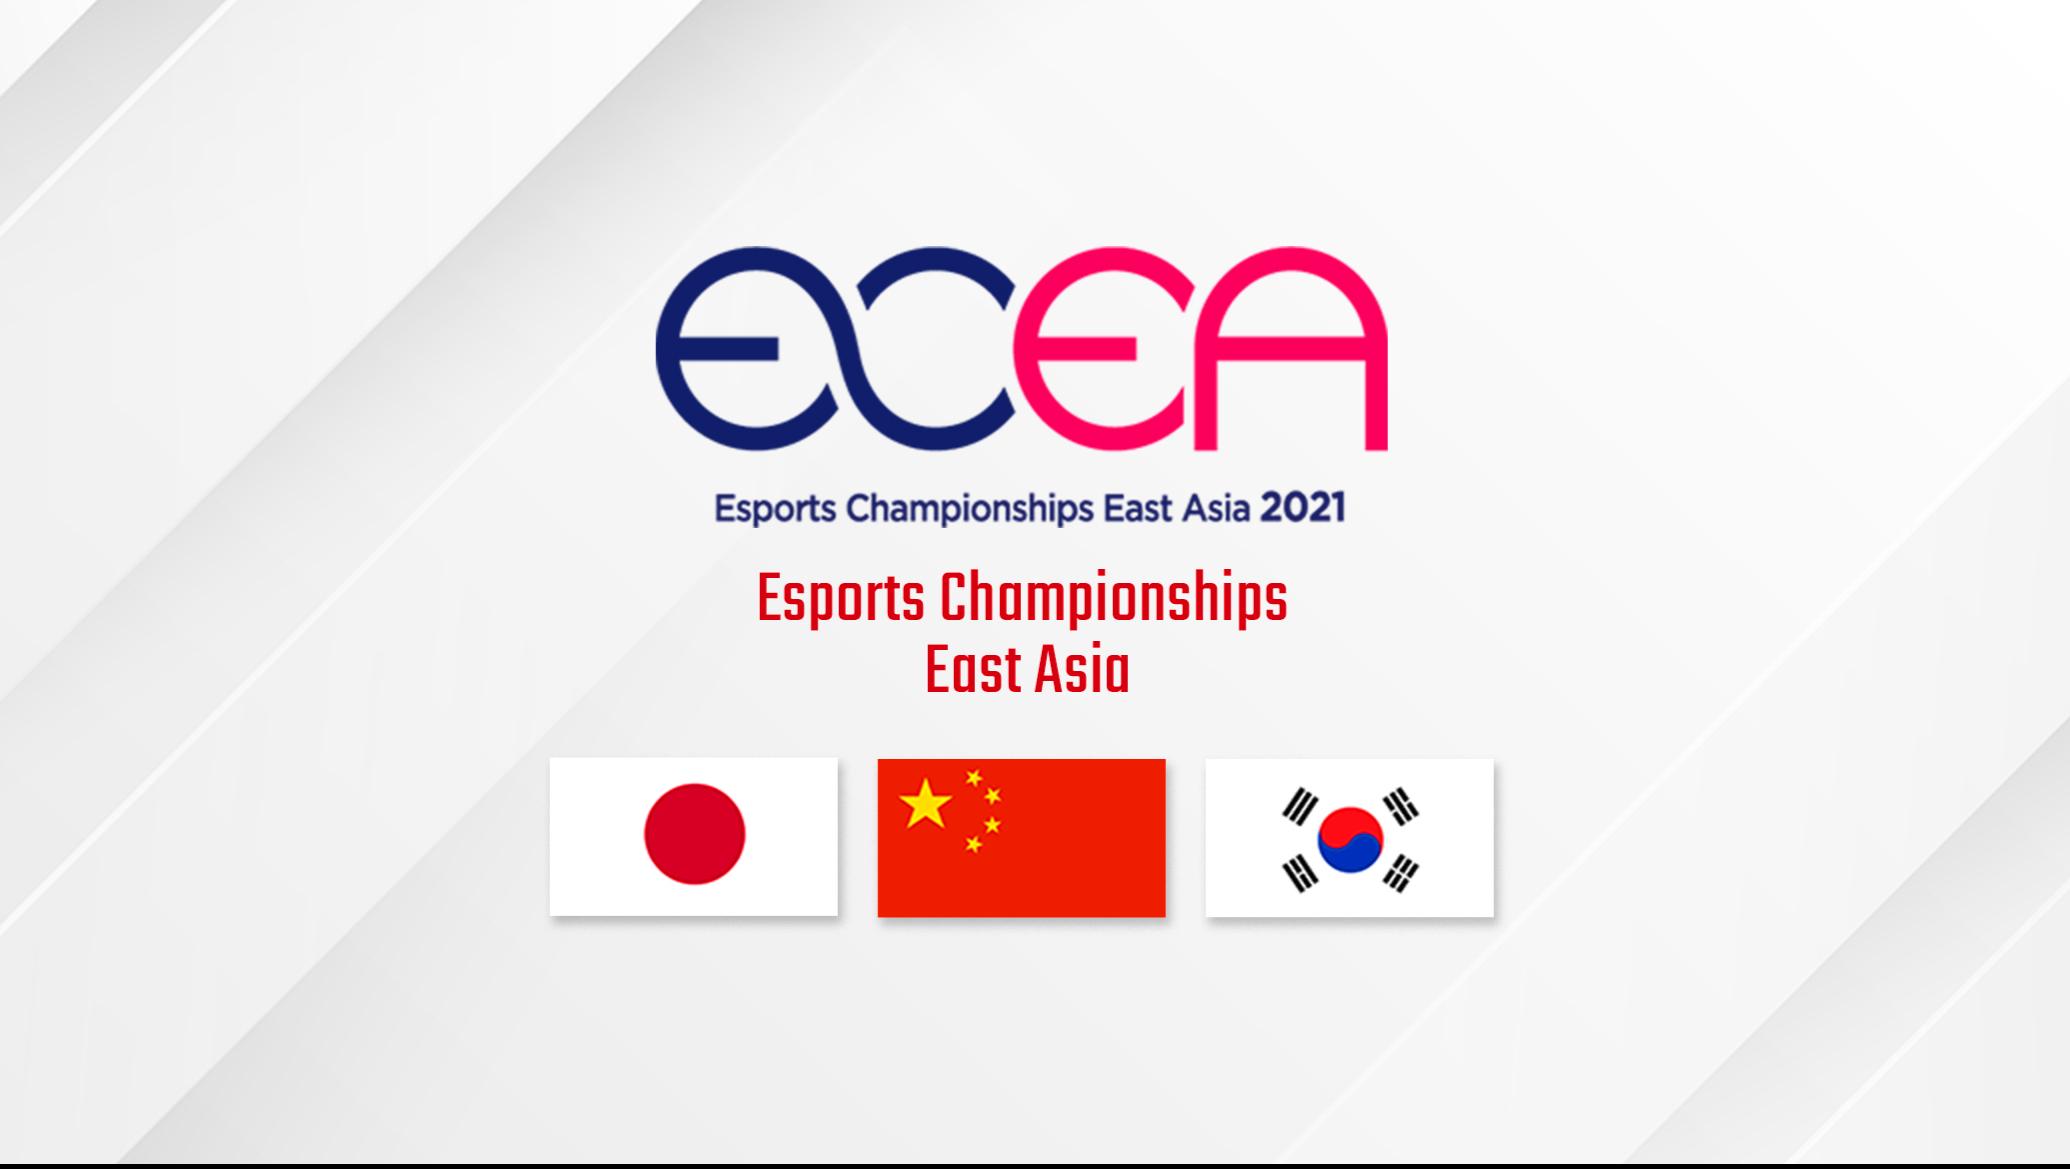 Esports Championships East Asia 2022 feature image